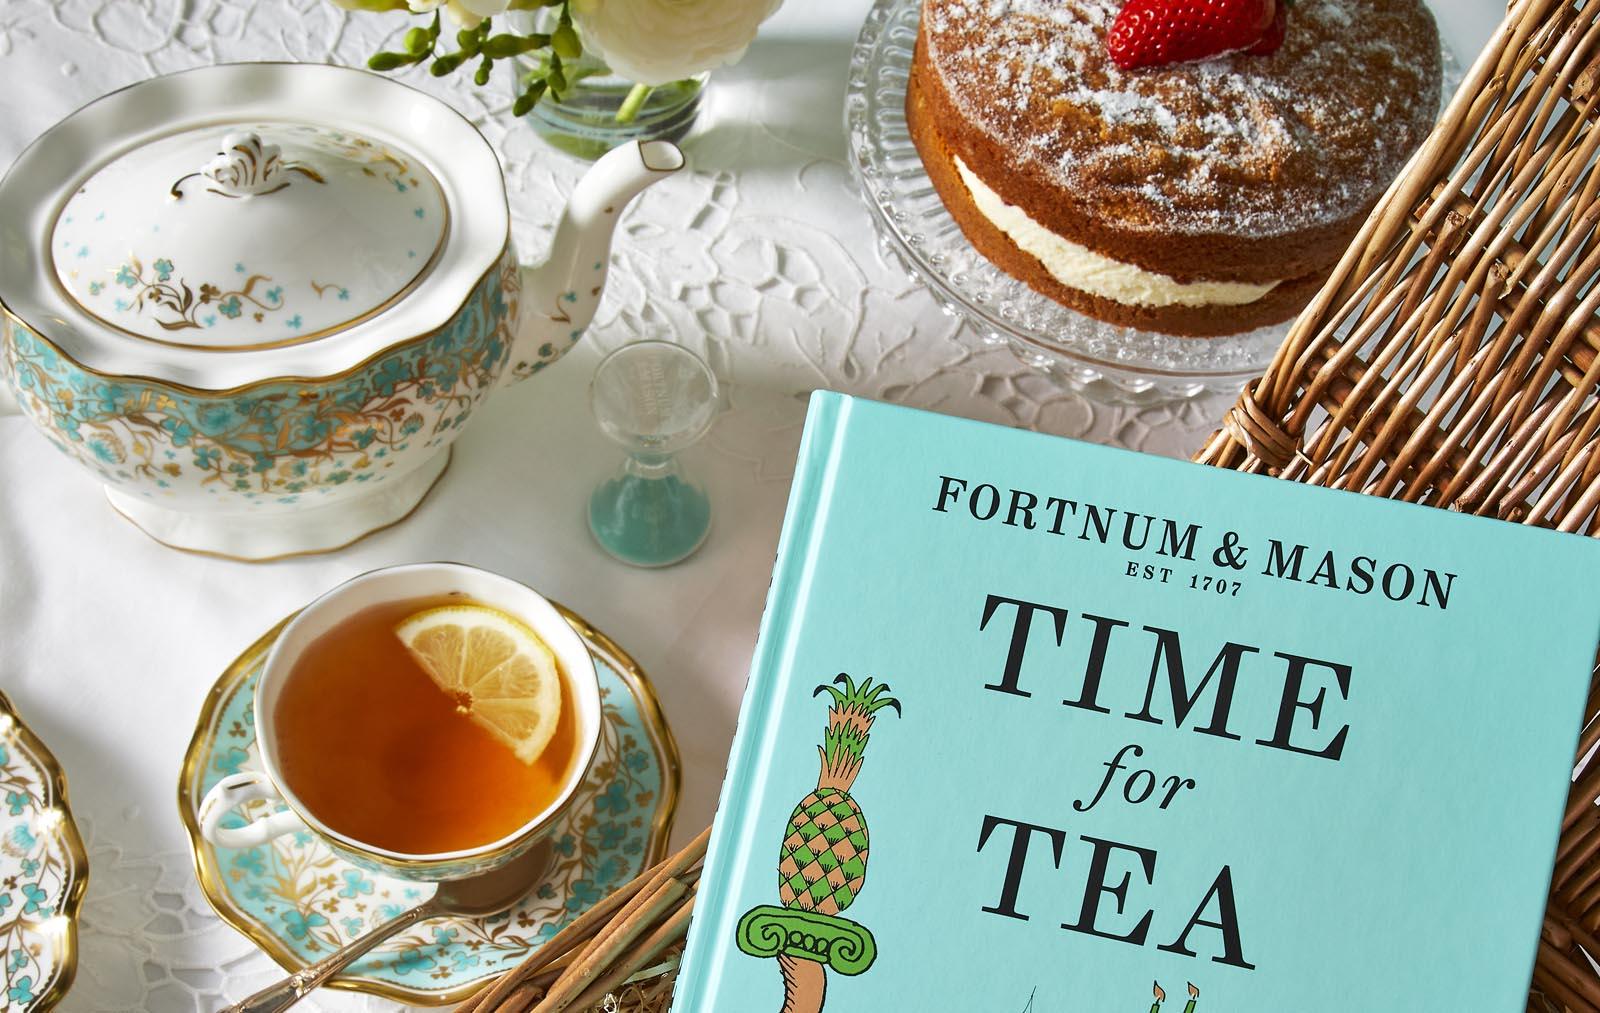 Fortnum & Mason Time For Tea book and cakes